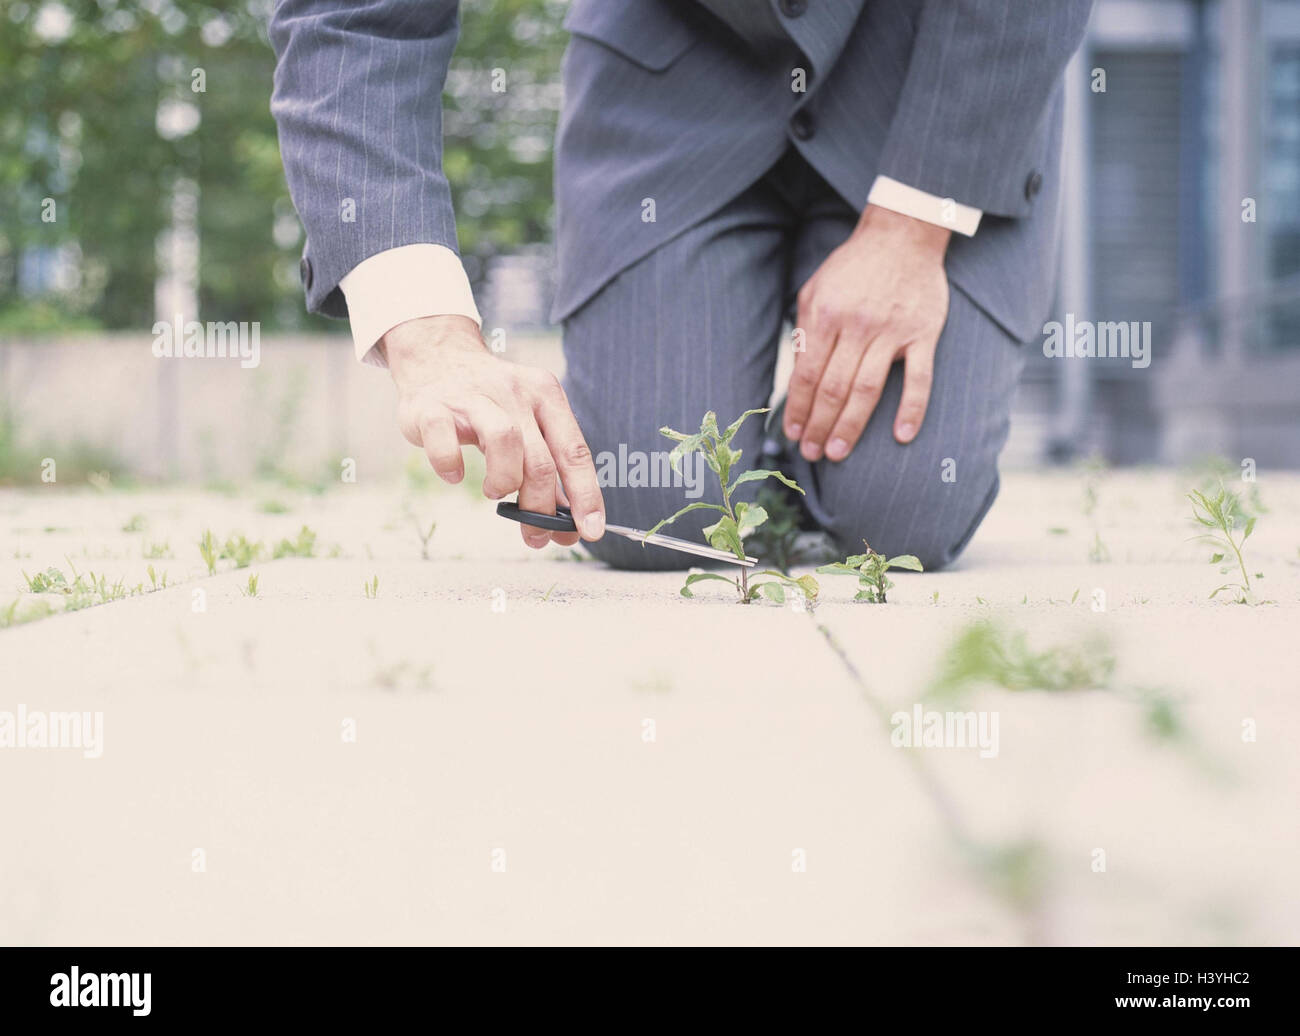 Businessman, kneel, scissors, weed, truncate, detail, floor, outside, business, manager, picky, care, Pingeligkeit, order, mess, exactly, übergenau, accuracy, pedant, Pedanterie, order sense, phobia, icon, growth, decision, care, power, influence, effect, Stock Photo